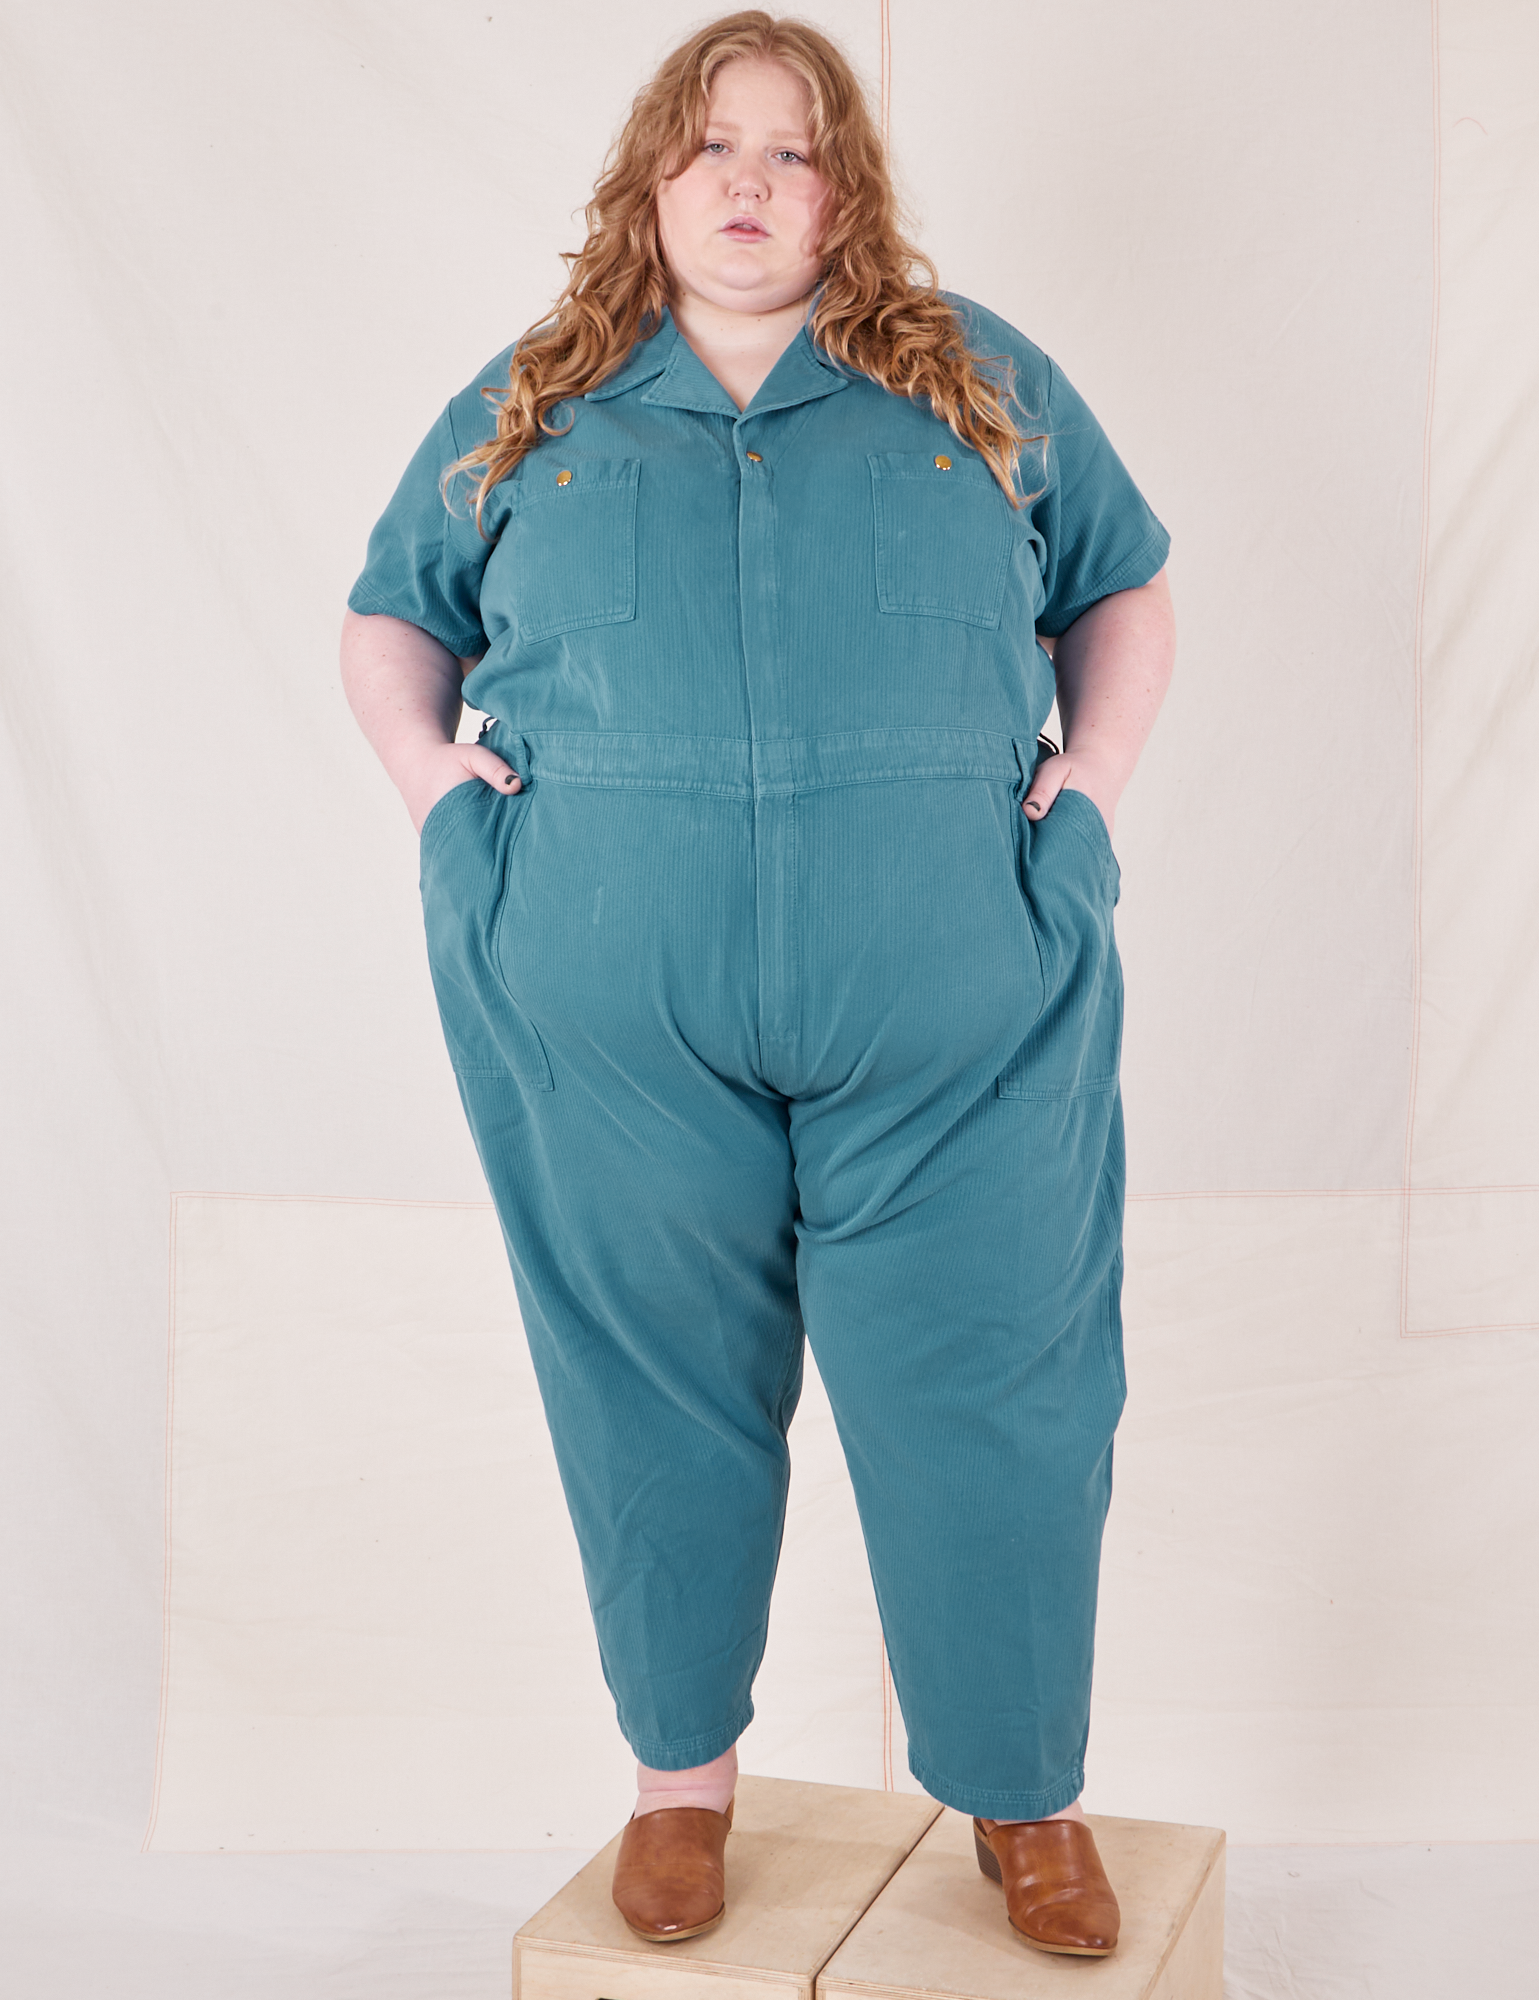 Catie is 5&#39;11&quot; and wearing 5XL Heritage Short Sleeve Jumpsuit in Marine Blue